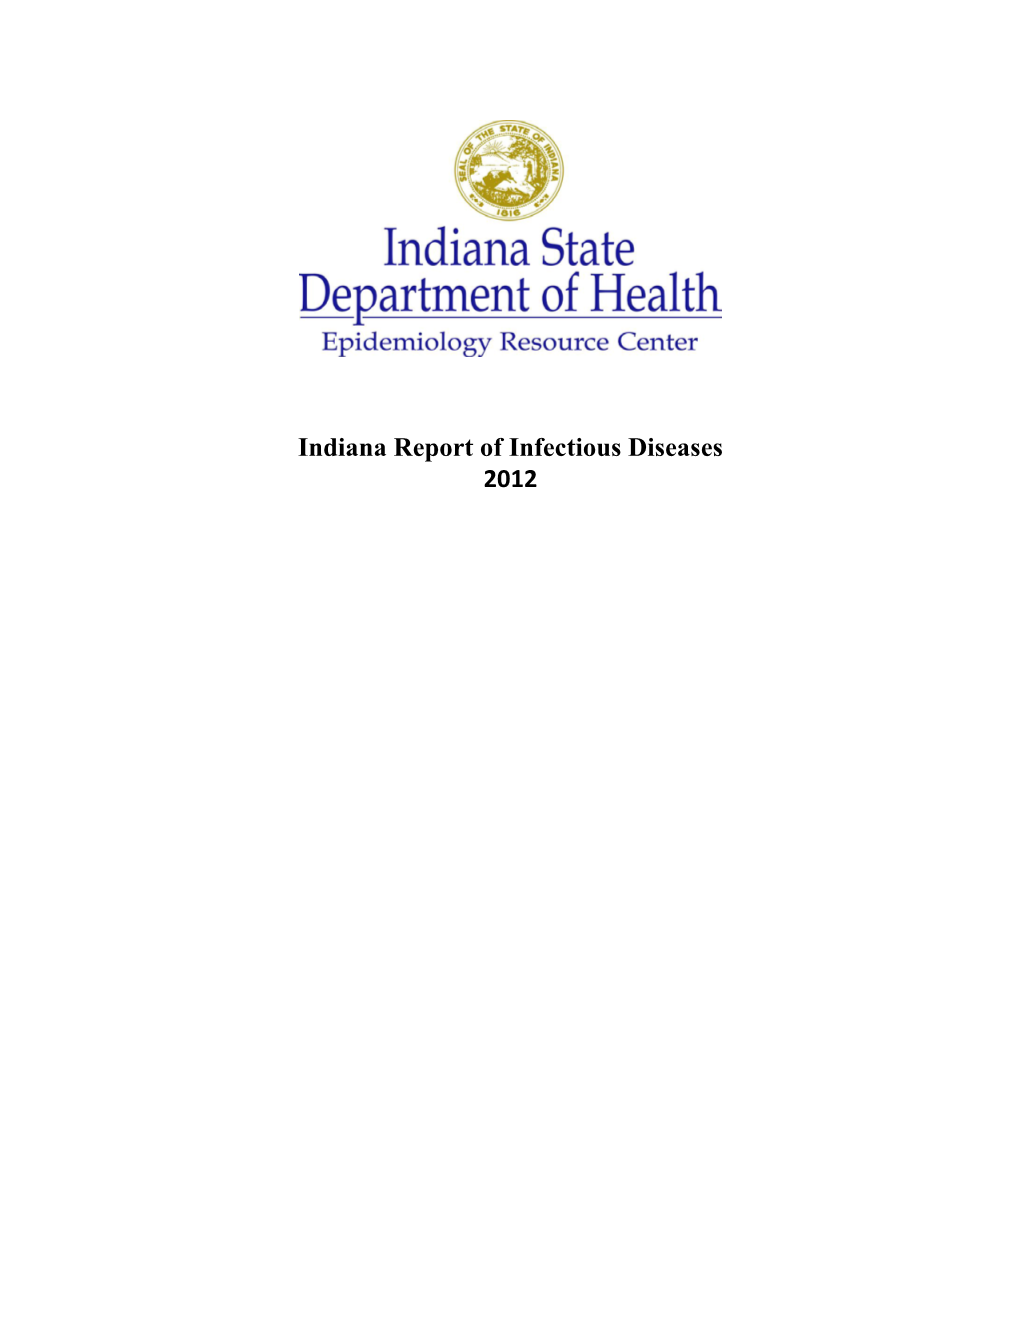 Indiana Report of Infectious Diseases 2012